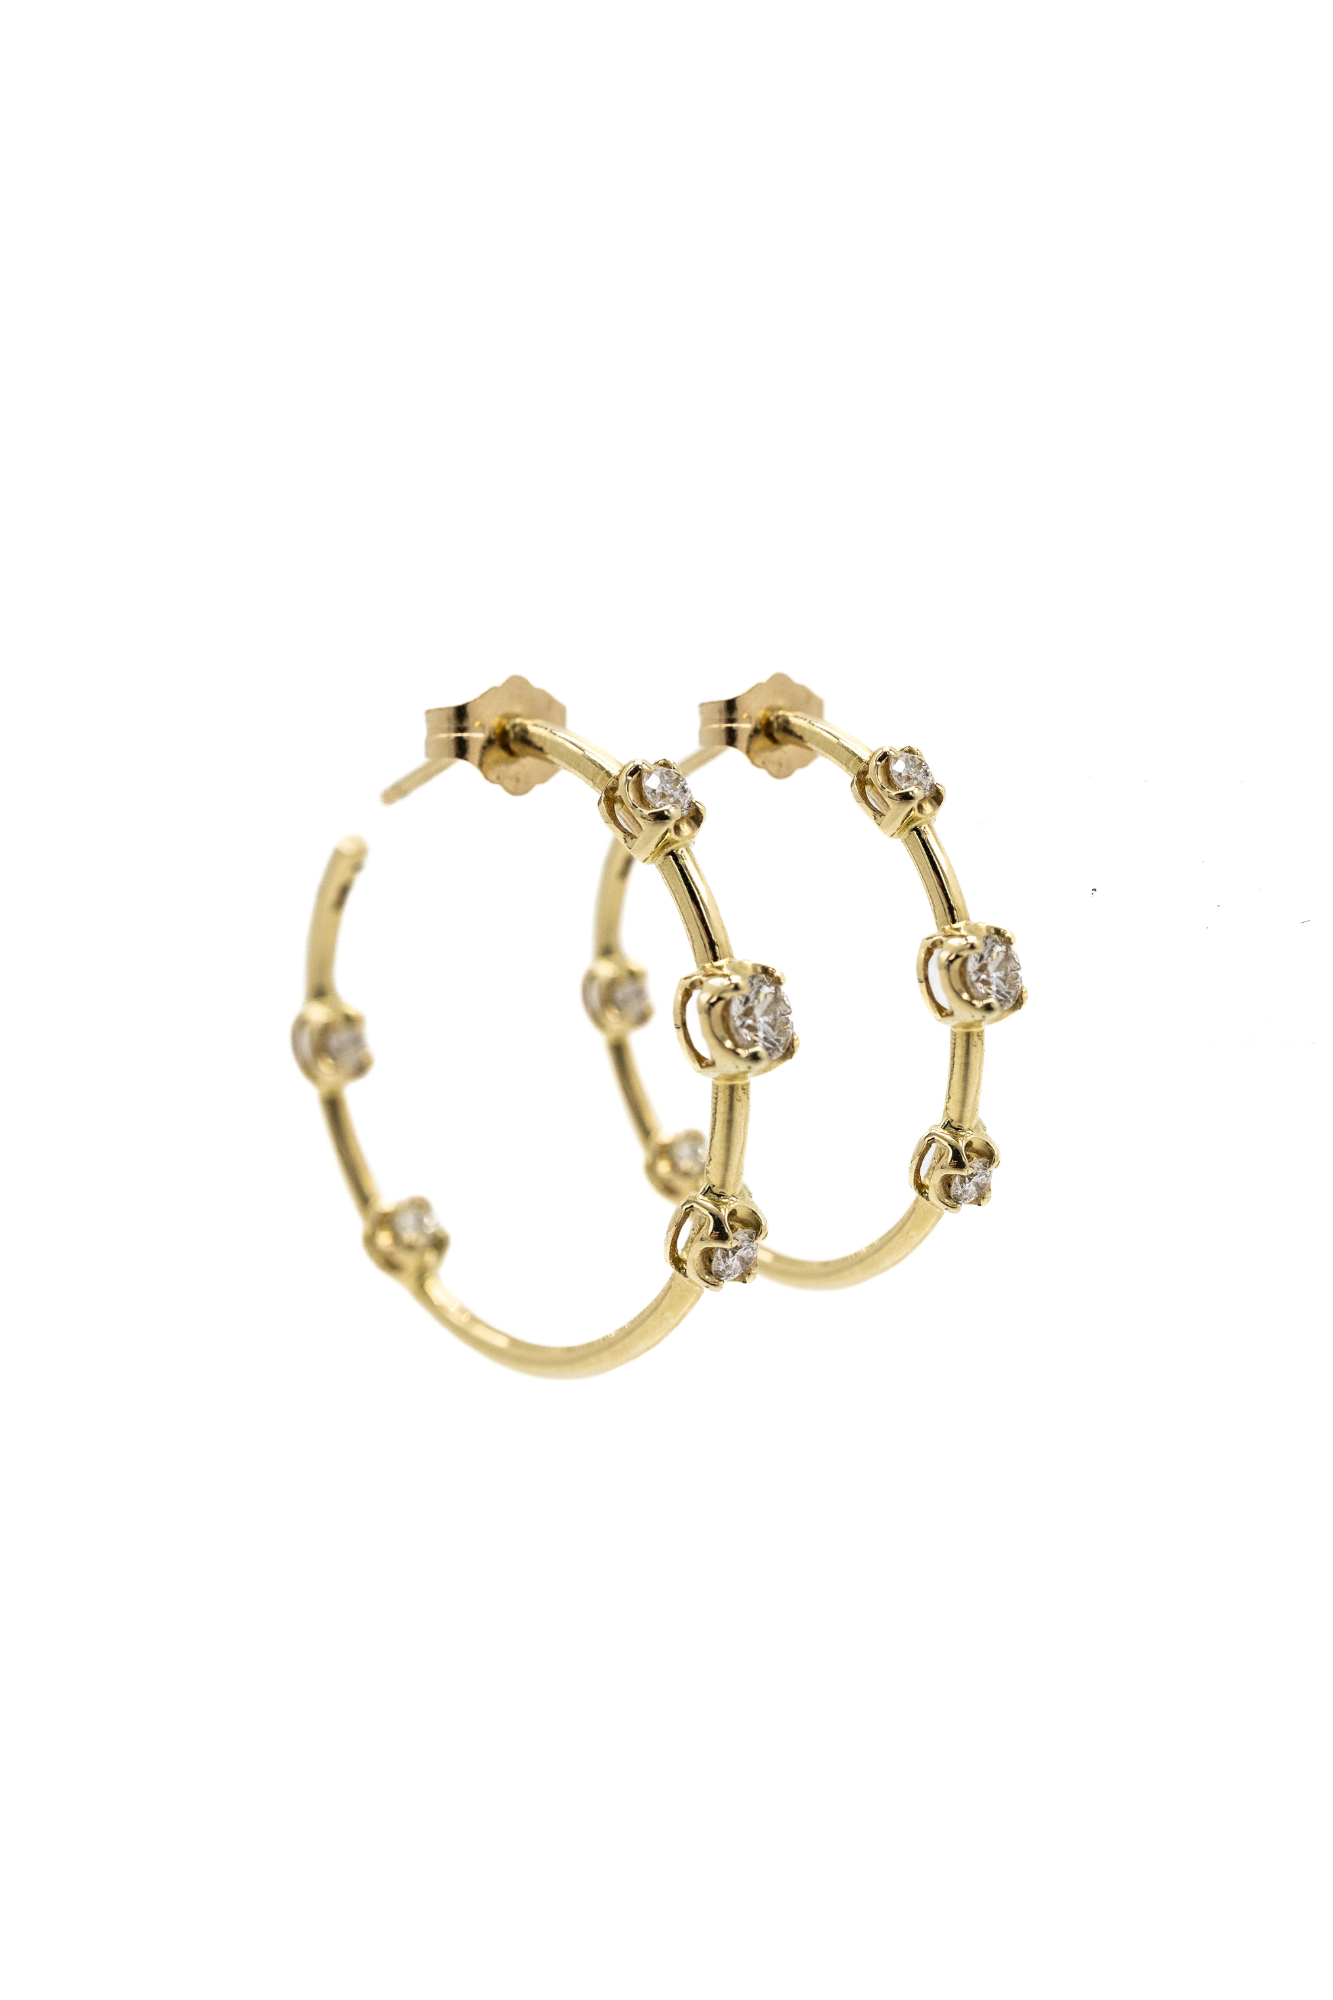 Crafted from 14k yellow gold, the Sophia Hoops from Jacquie Aiche feature a graduating diamond design, set with a total of 5 diamonds. These 1" hoops are the perfect addition to any collection. Sold as a pair, these timeless hoops are the perfect way to complete any look.